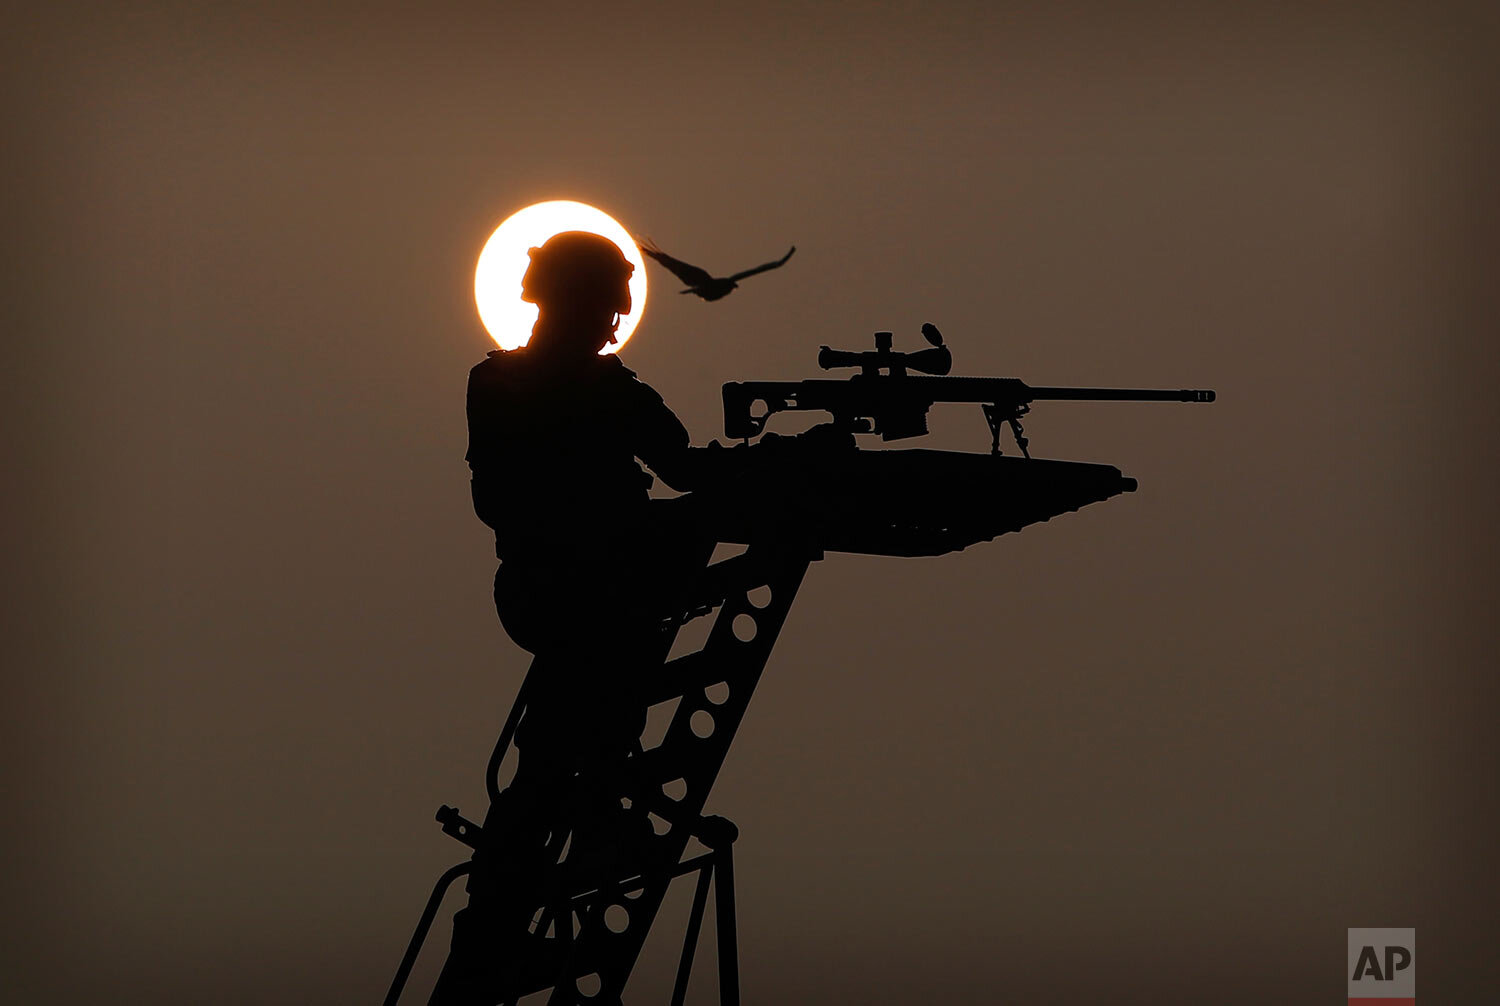  A National Security Guard soldier takes position on his tableaux during rehearsals for the upcoming Republic Day parade in New Delhi, India, Thursday, Jan. 21, 2021. (AP Photo/Manish Swarup) 